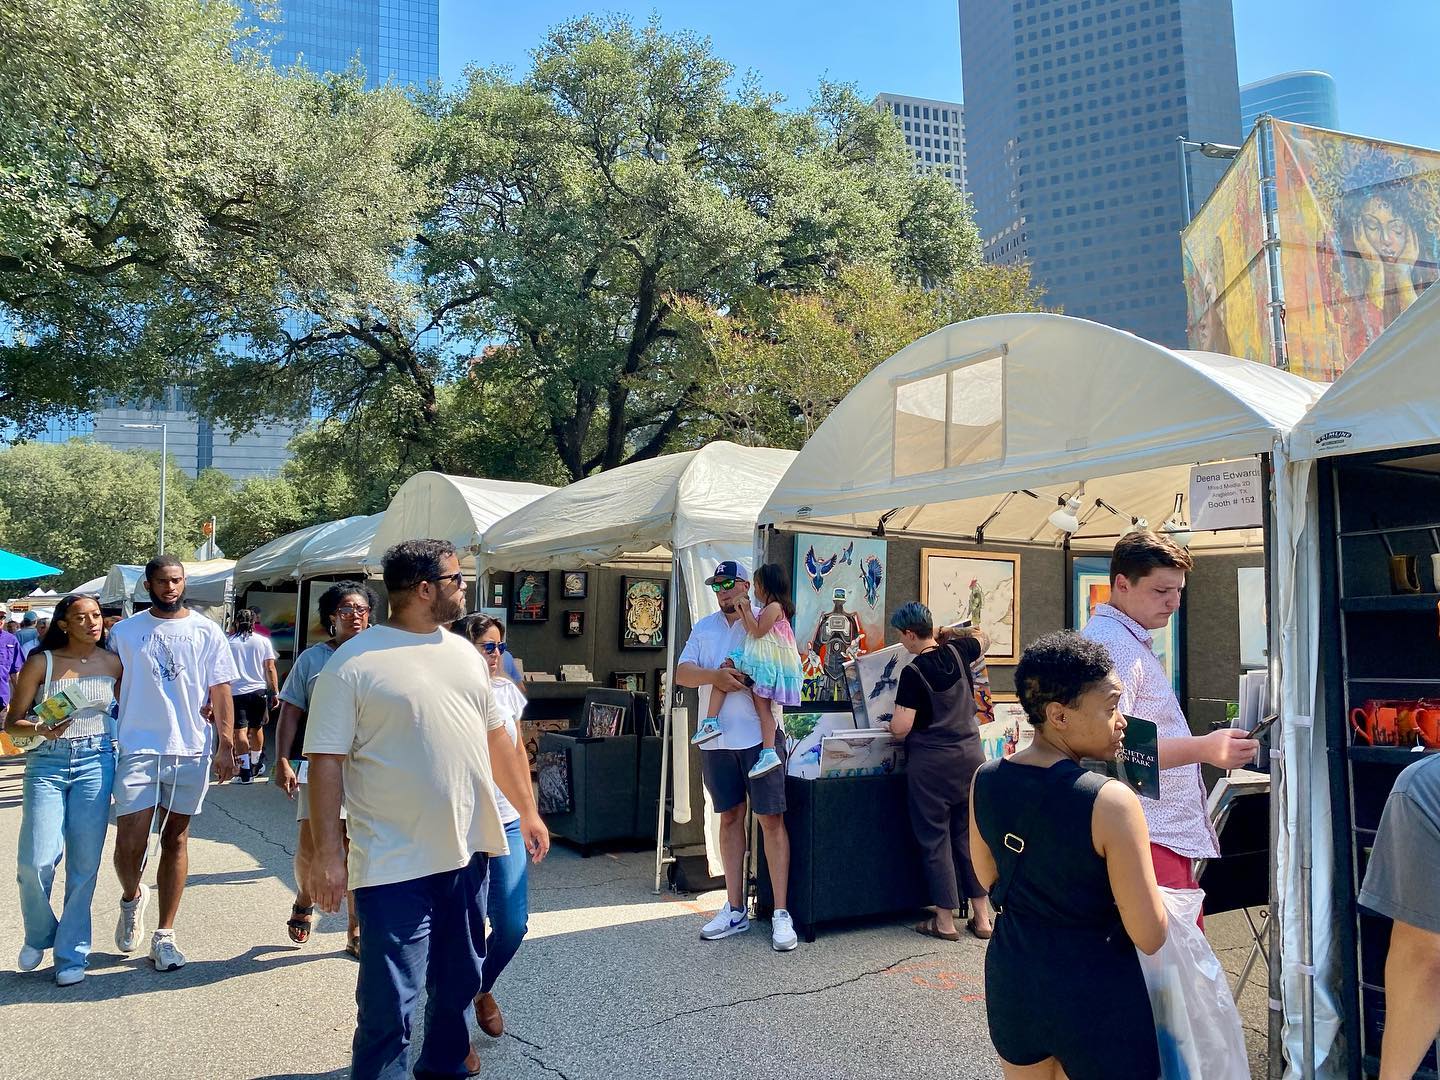 Kids Attend Free this Weekend at Bayou City Art Festival